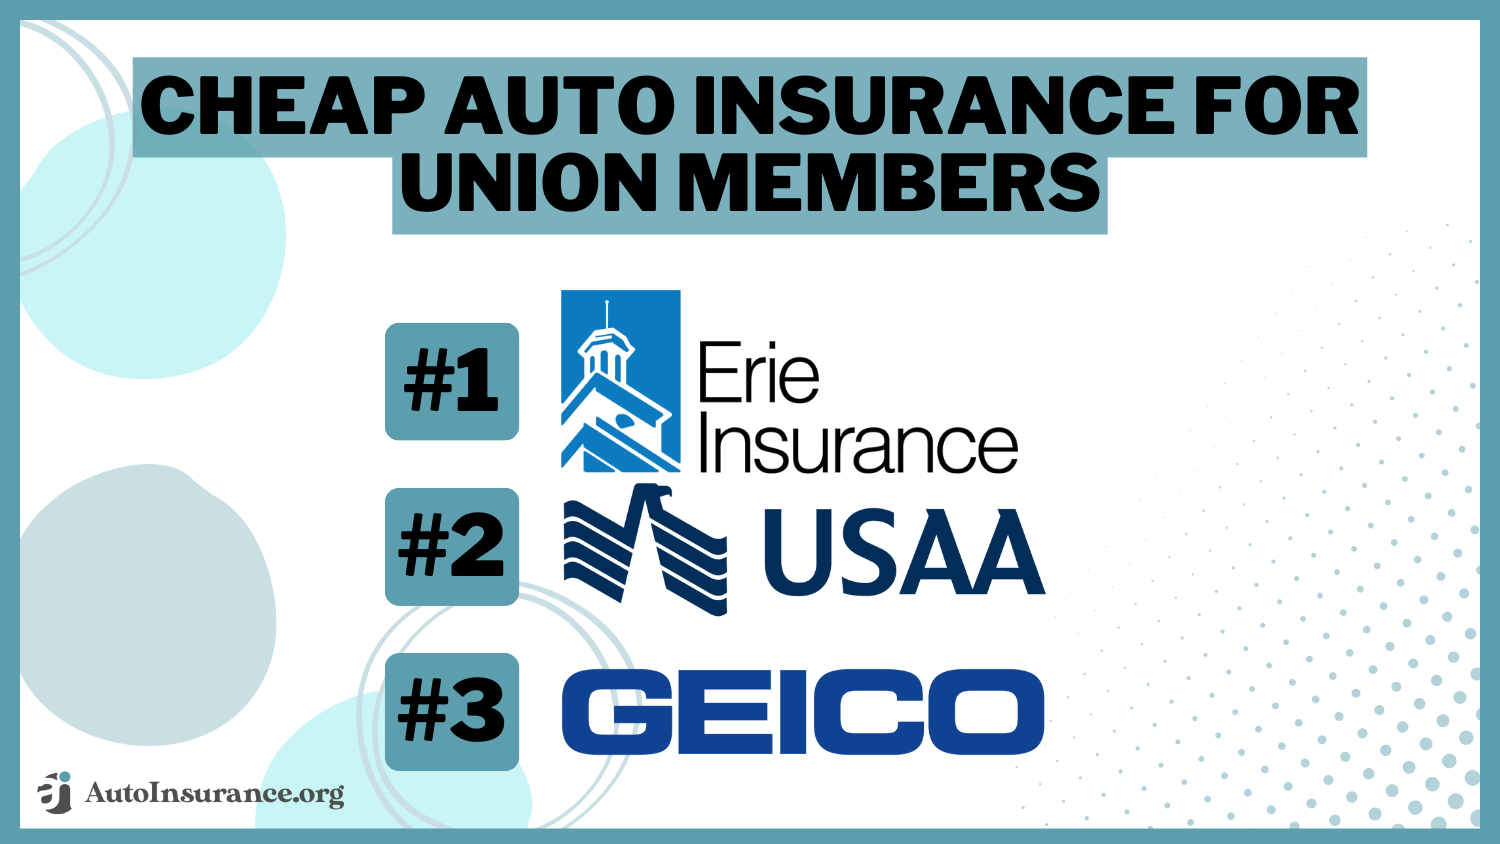 Erie, USAA, Geico: cheap auto insurance for union members